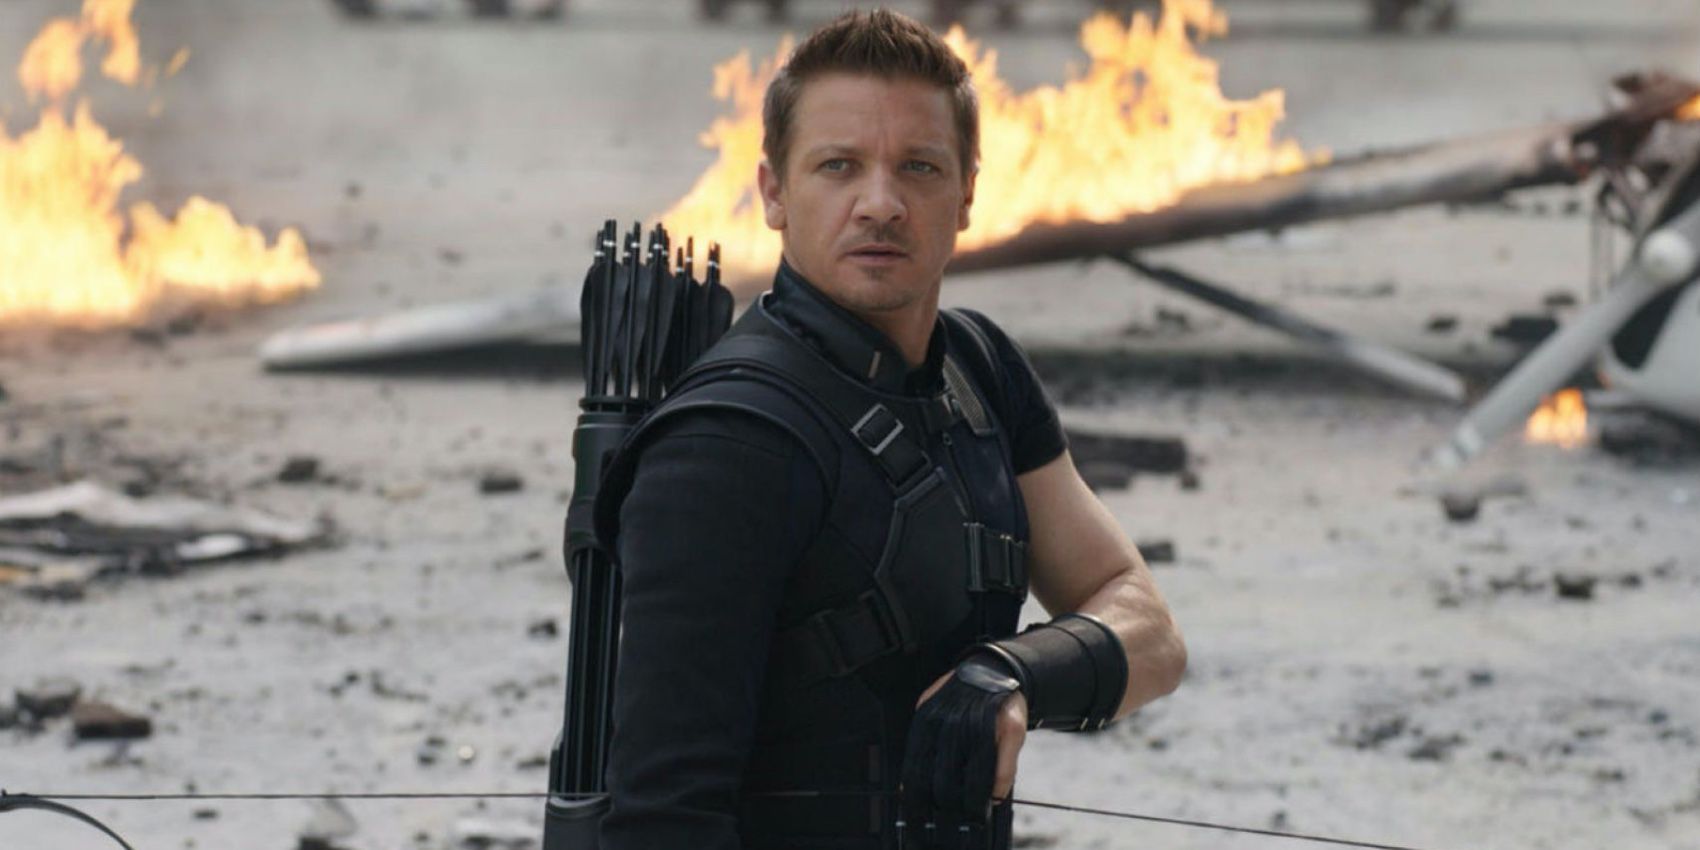 Hawkeye Is The Most Valuable Hero In MCU Based On Box Office & Reviews